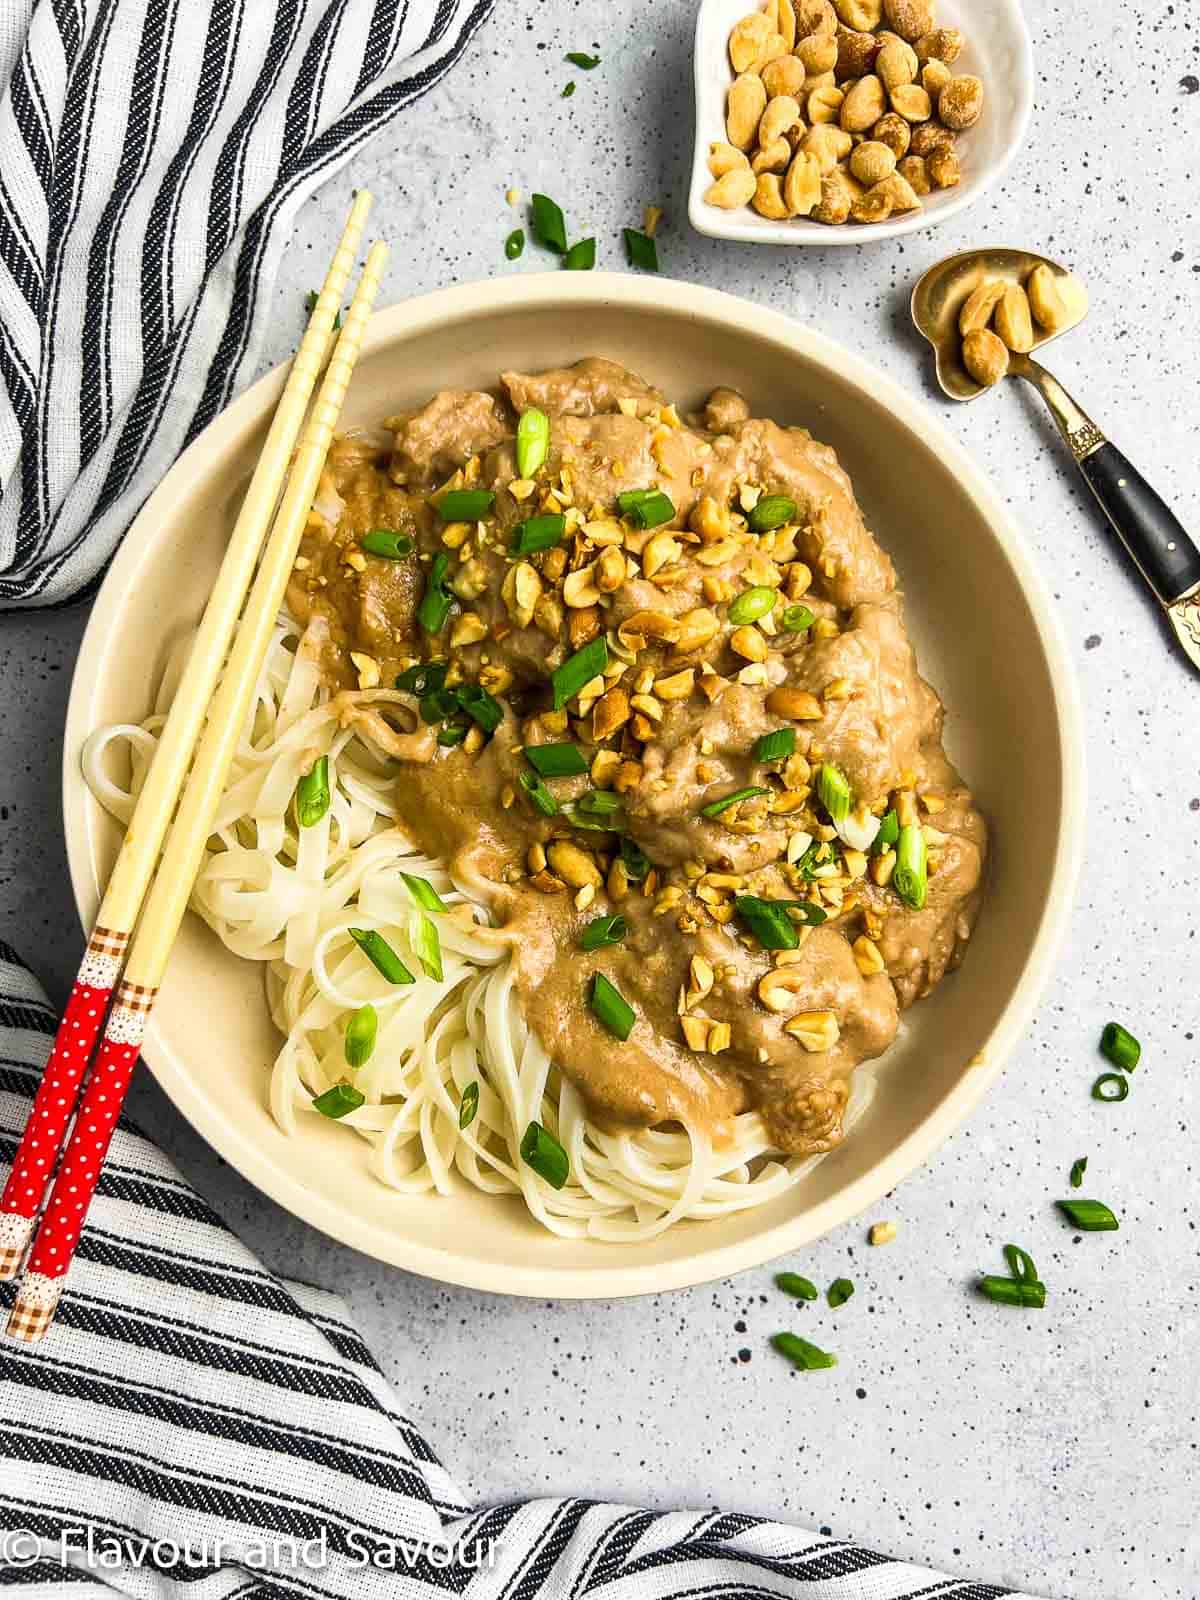 A shallow bowl with Thai peanut chicken and noodles garnished with chopped peanuts and green onions.